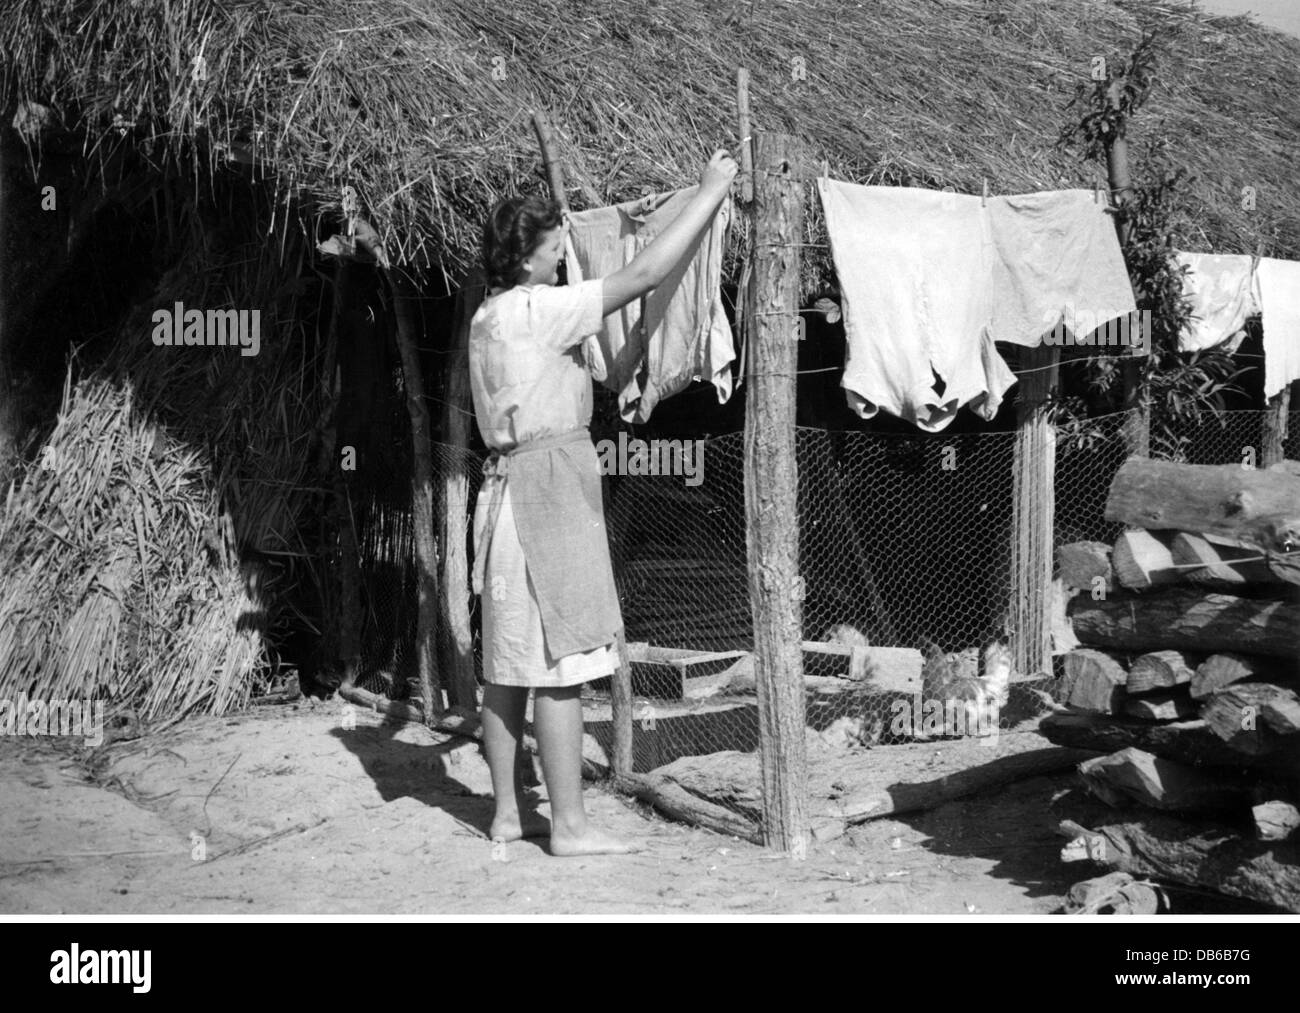 agriculture, farmer, farmer's wife hanging out laundry to dry, isle of Gruen, Rhineland-Palatinate, 1950s, Additional-Rights-Clearences-Not Available Stock Photo